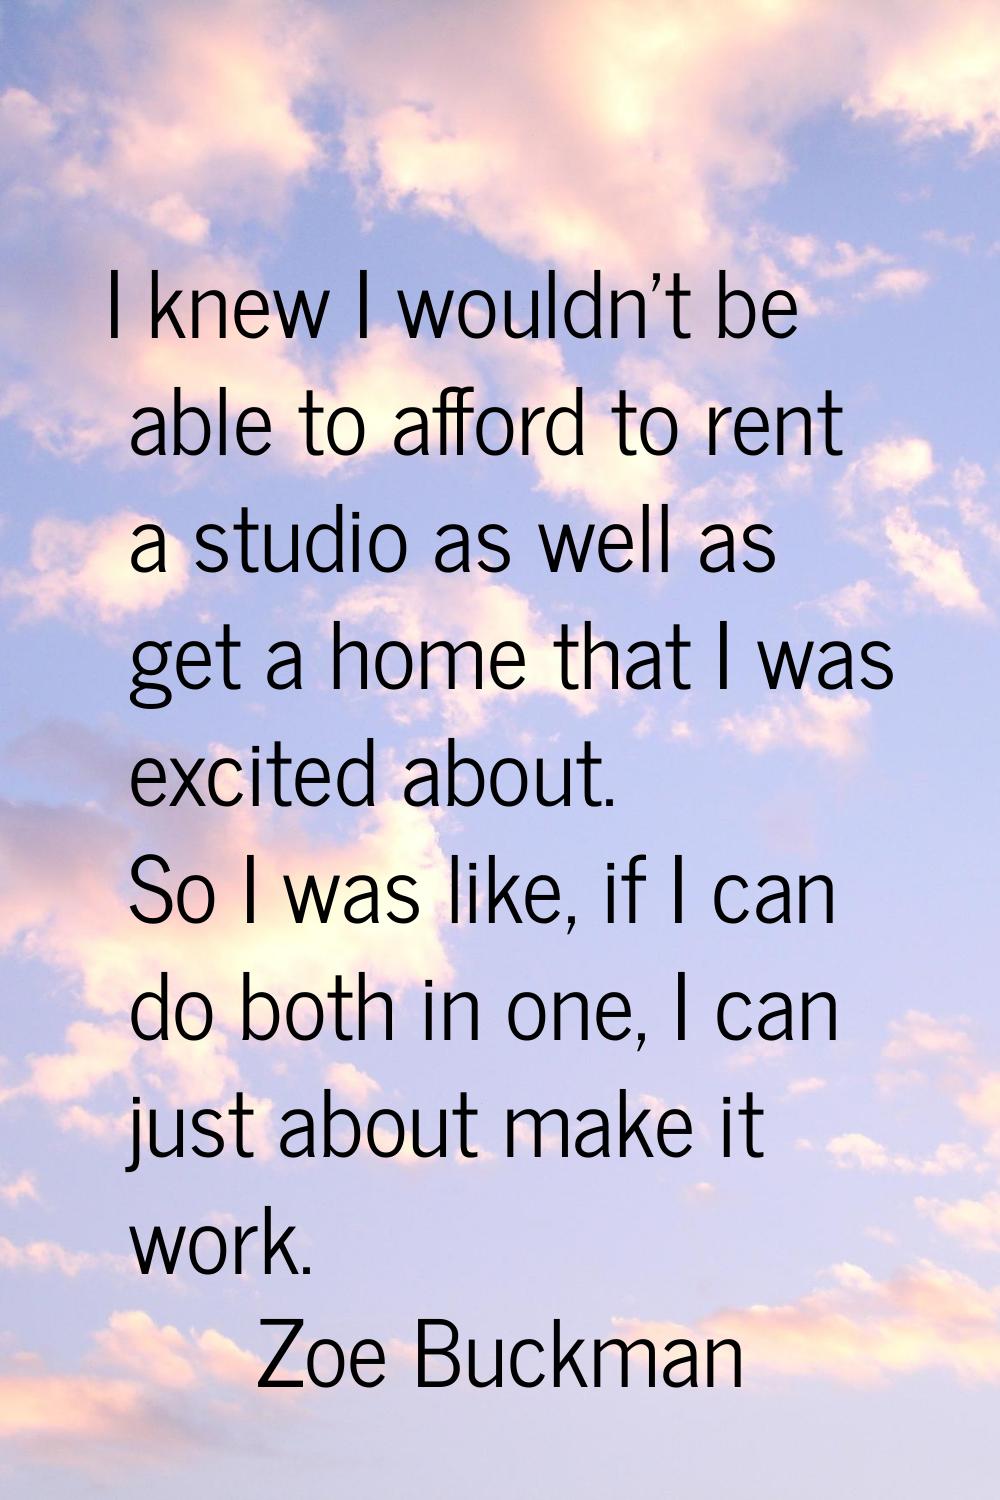 I knew I wouldn't be able to afford to rent a studio as well as get a home that I was excited about